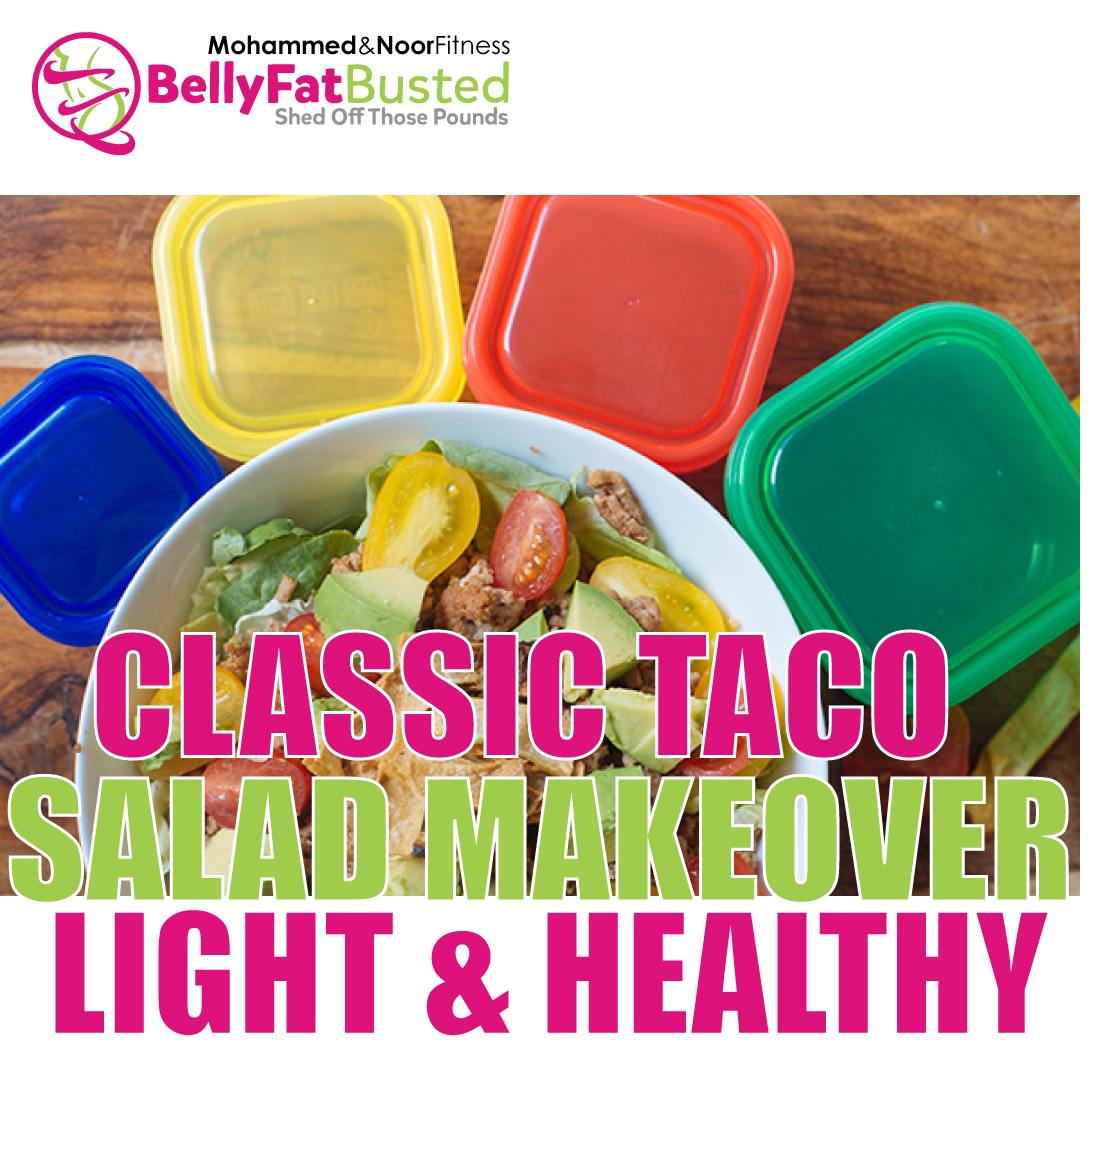 beachbody-bellyfatbusted-mohammed-classic-taco-salad-makeover-light-and-healthy-nutrition-recipe-15-4-2016